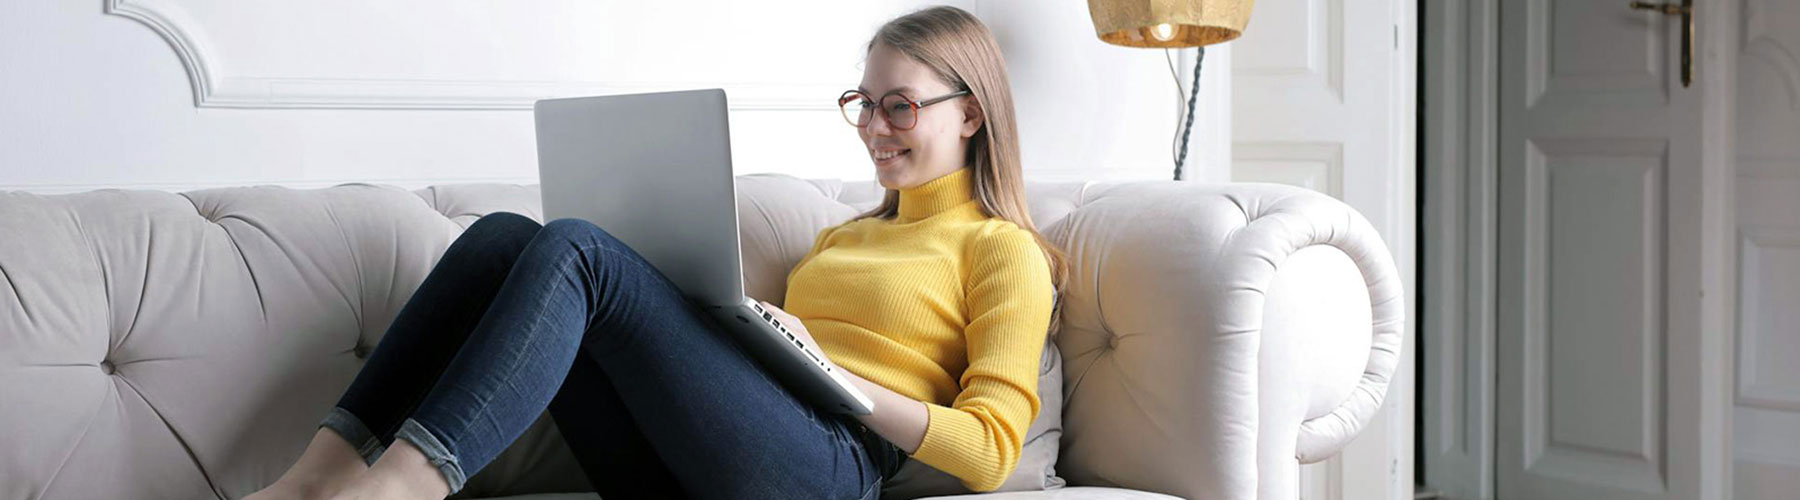 Smiling female in a yellow long sleeve shirt, jeans, and glasses happily working on a laptop while sitting on a couch in a living room